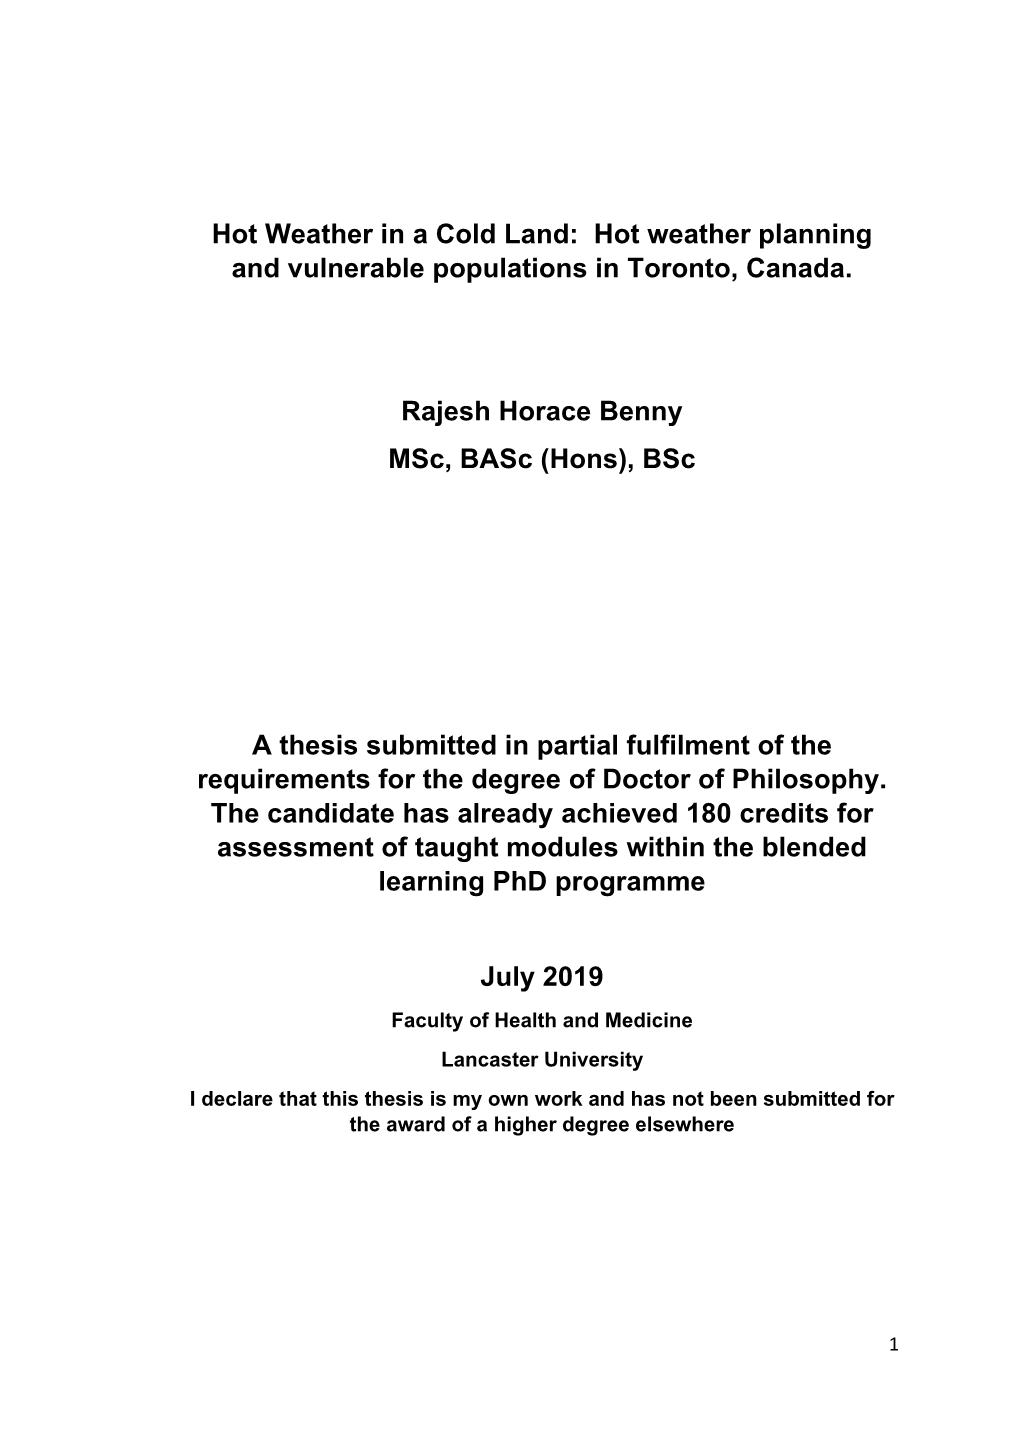 Hot Weather Planning and Vulnerable Populations in Toronto, Canada